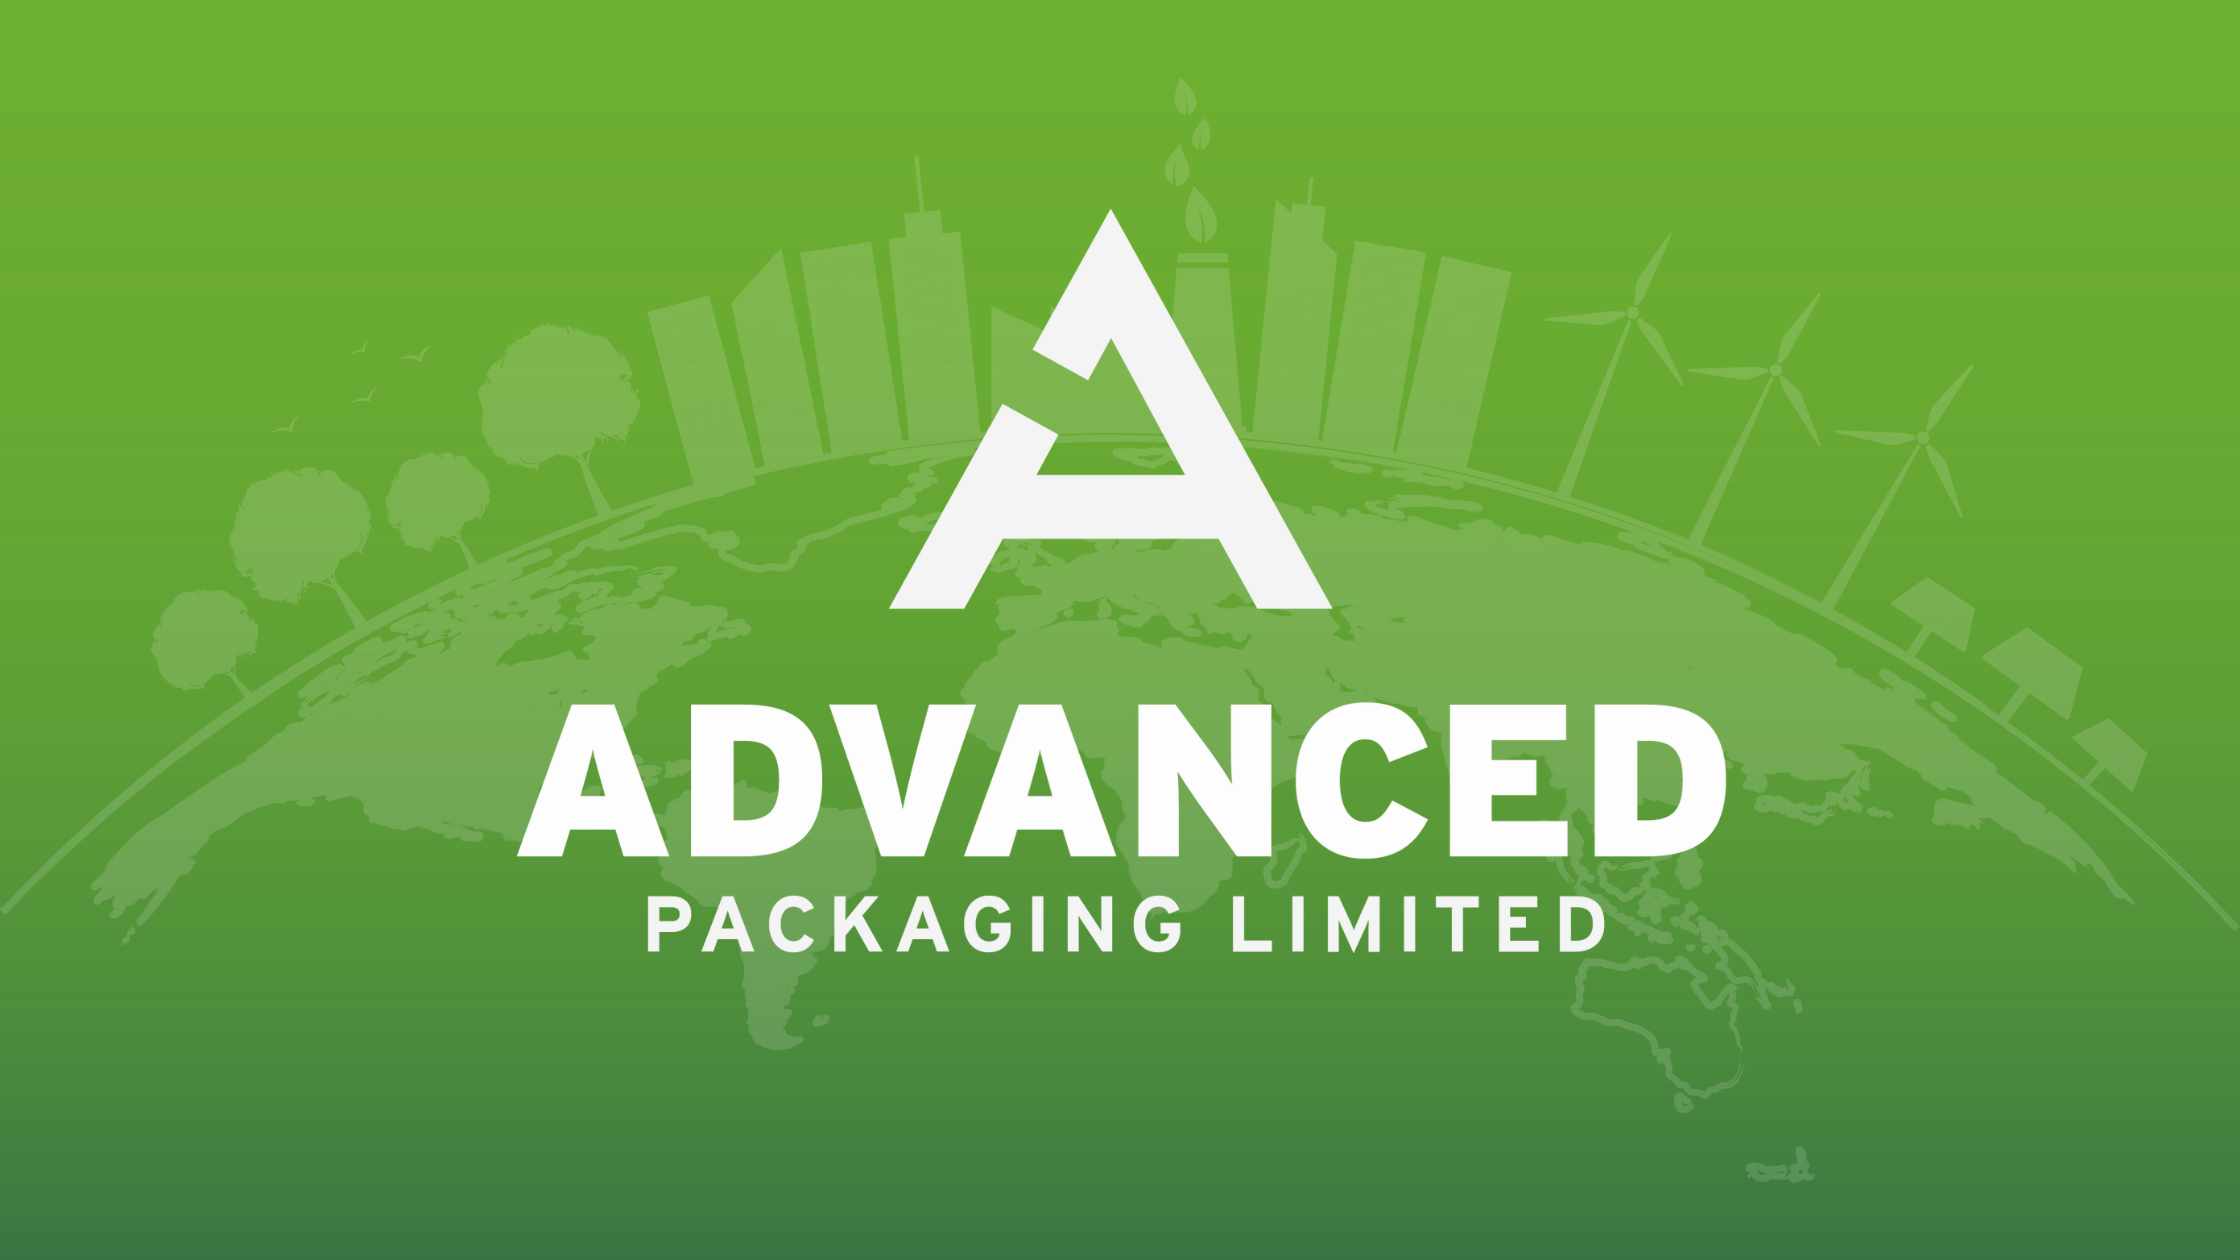 Advanced Packaging, Green Sustainability Background